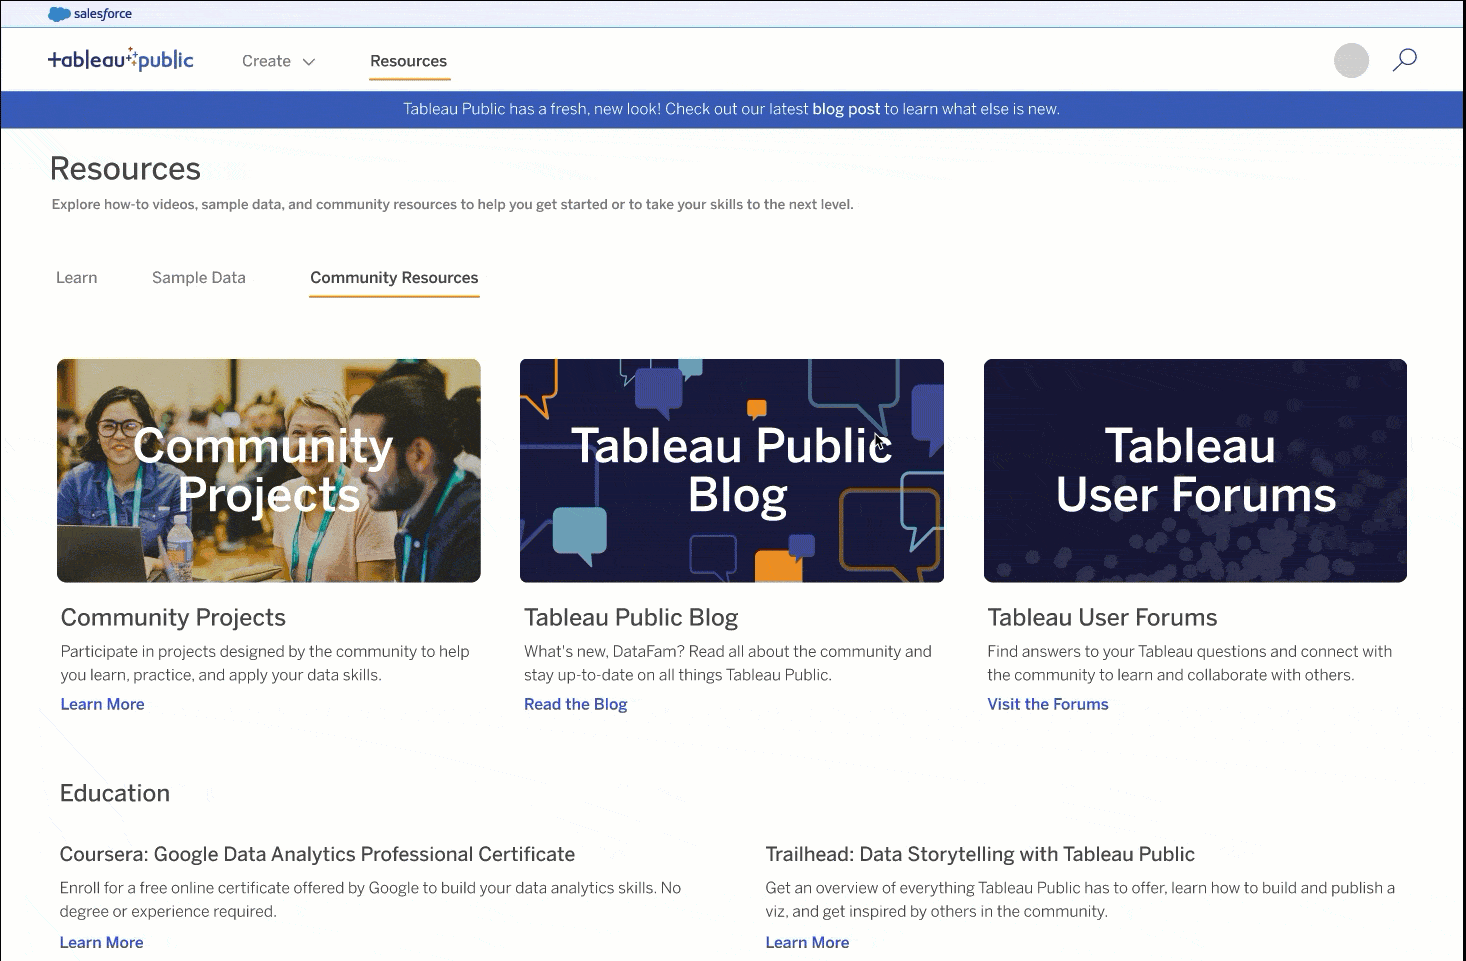 Revizit the Tableau Public homepage to discover what’s new